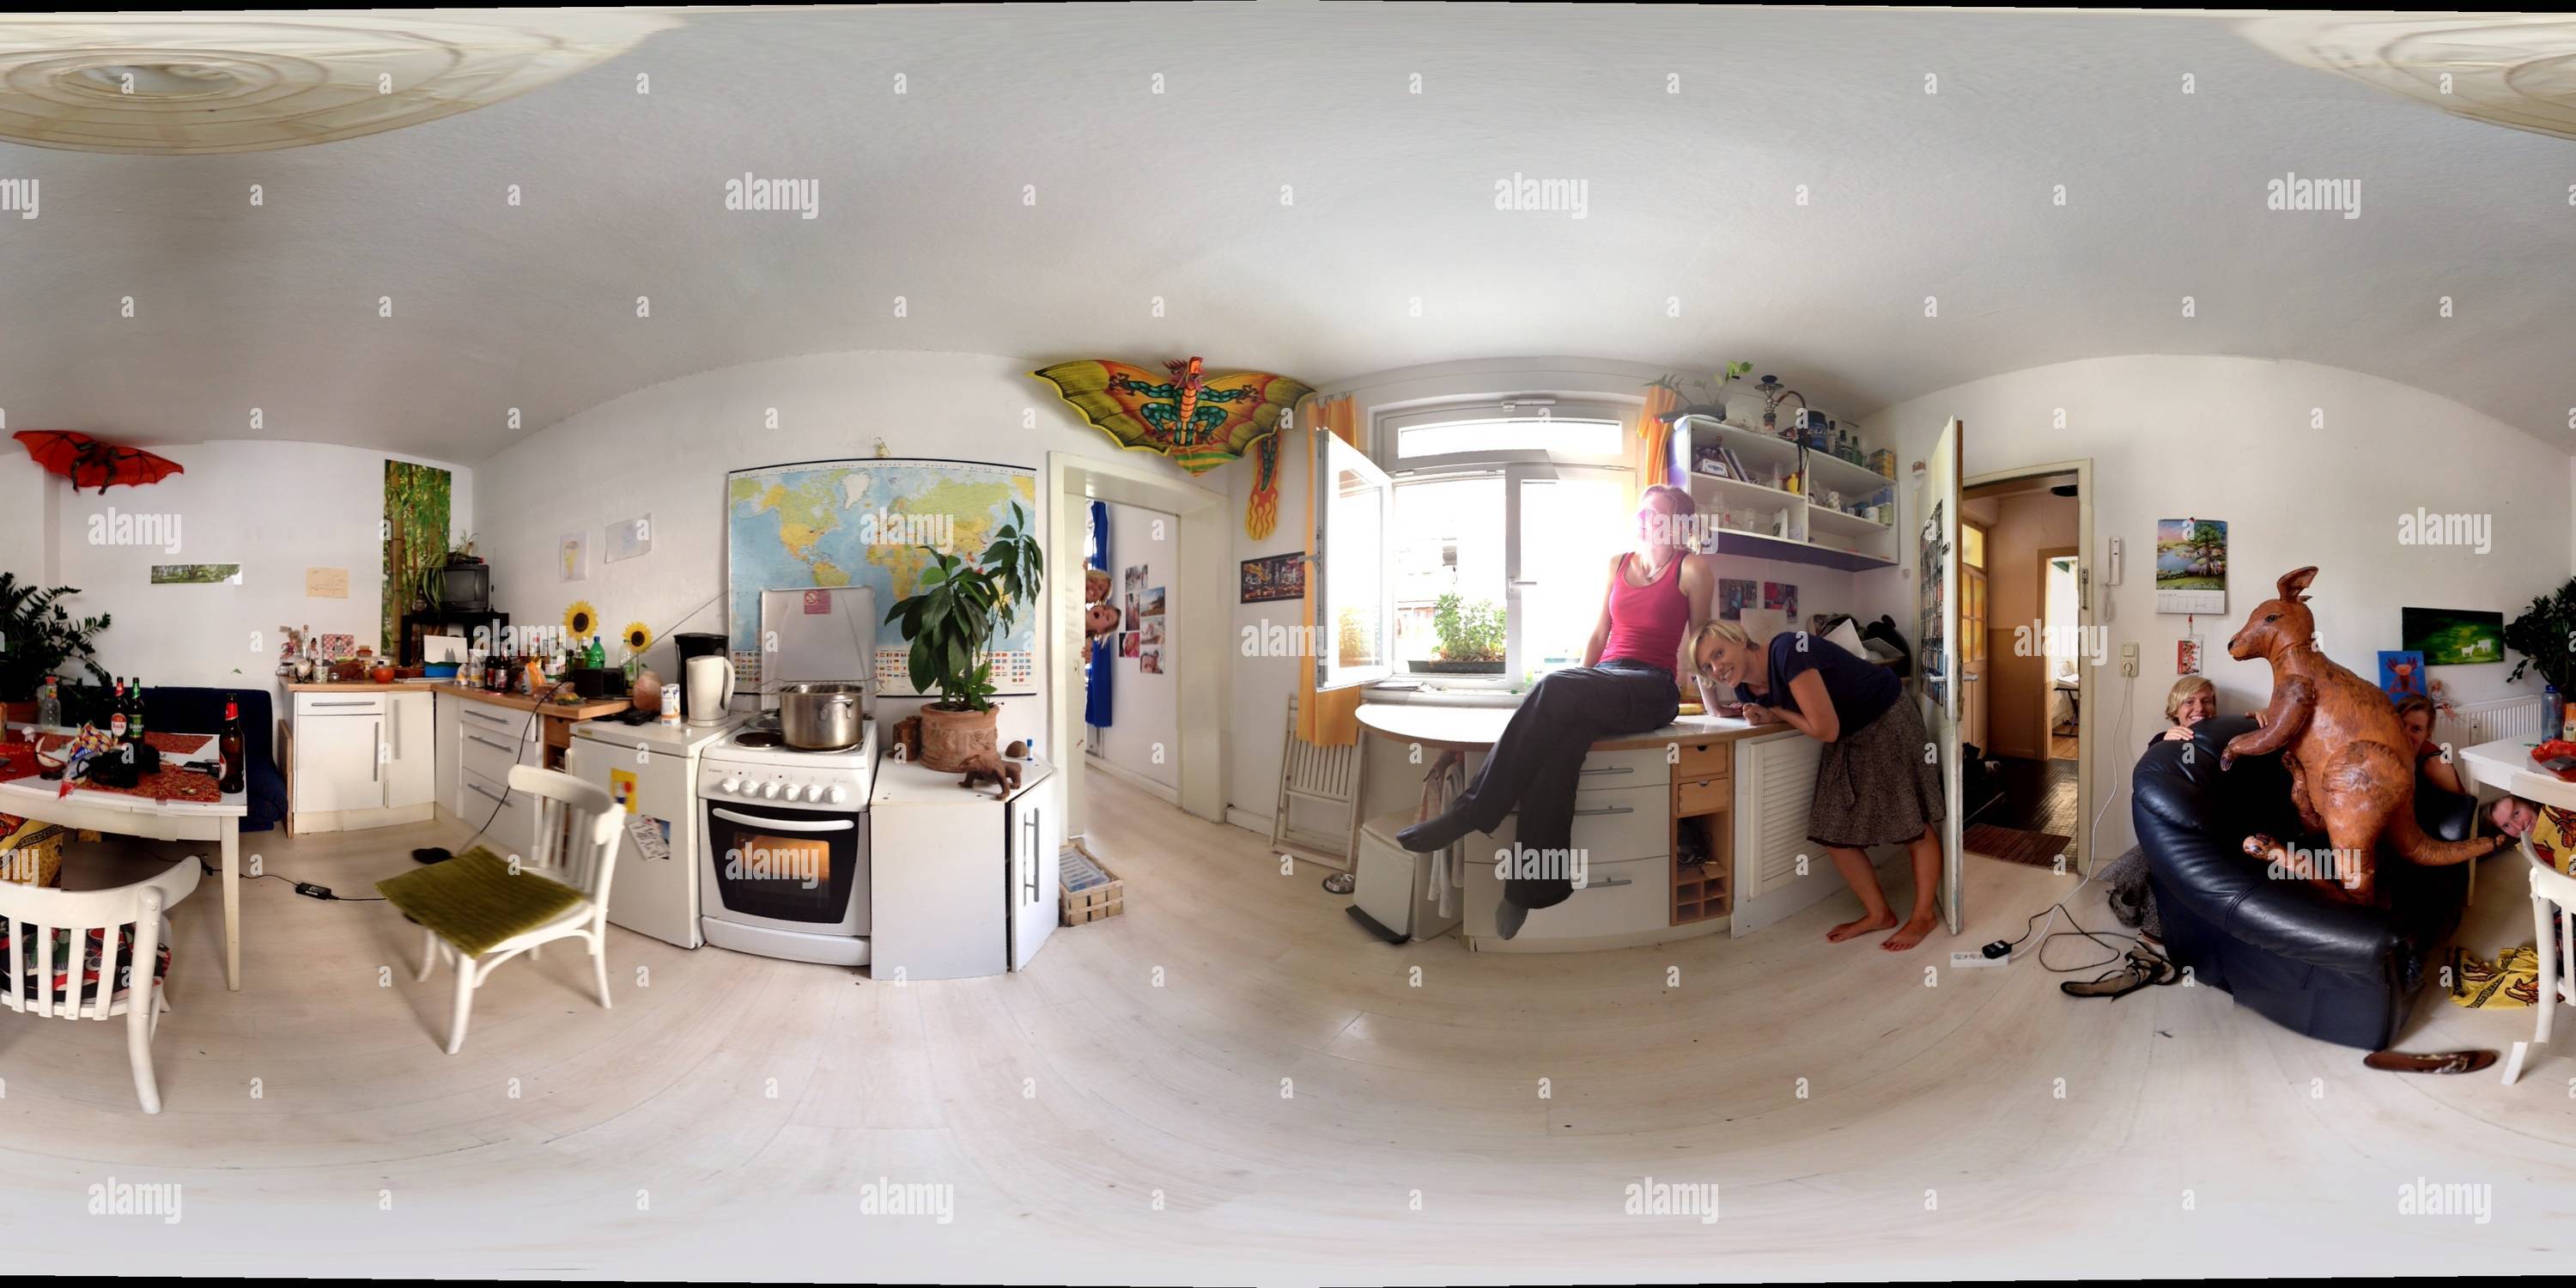 360 degree panoramic view of Carina's place